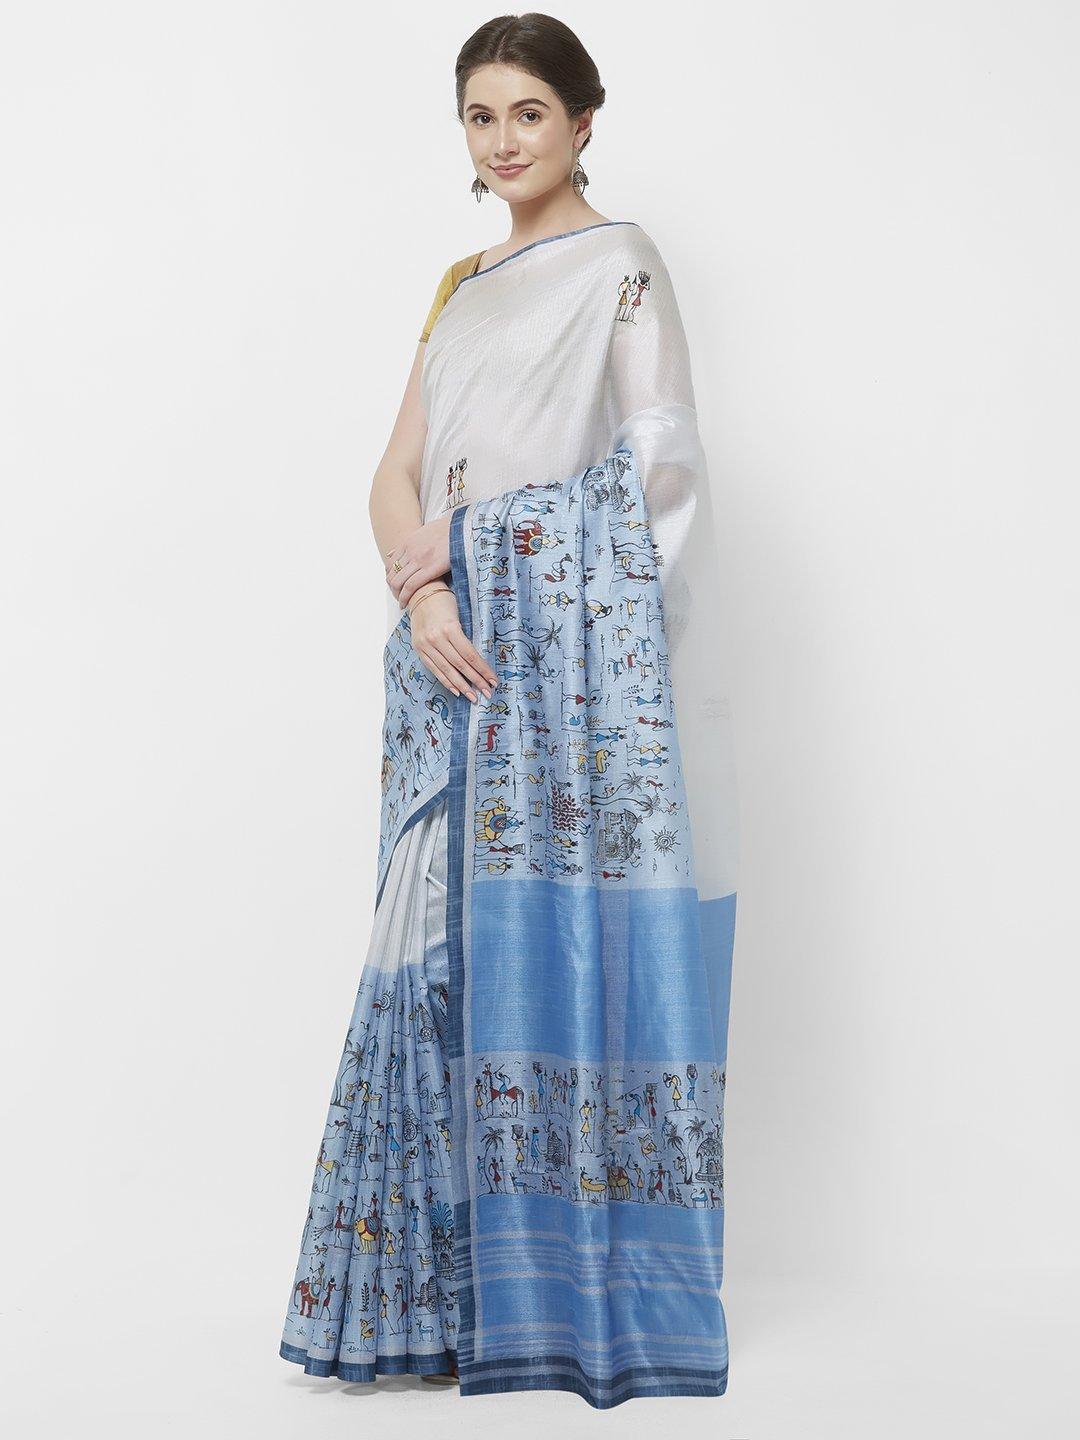 CraftsCollection.in -White and Blue Chanderi Saree with handpainted Tribal motifs